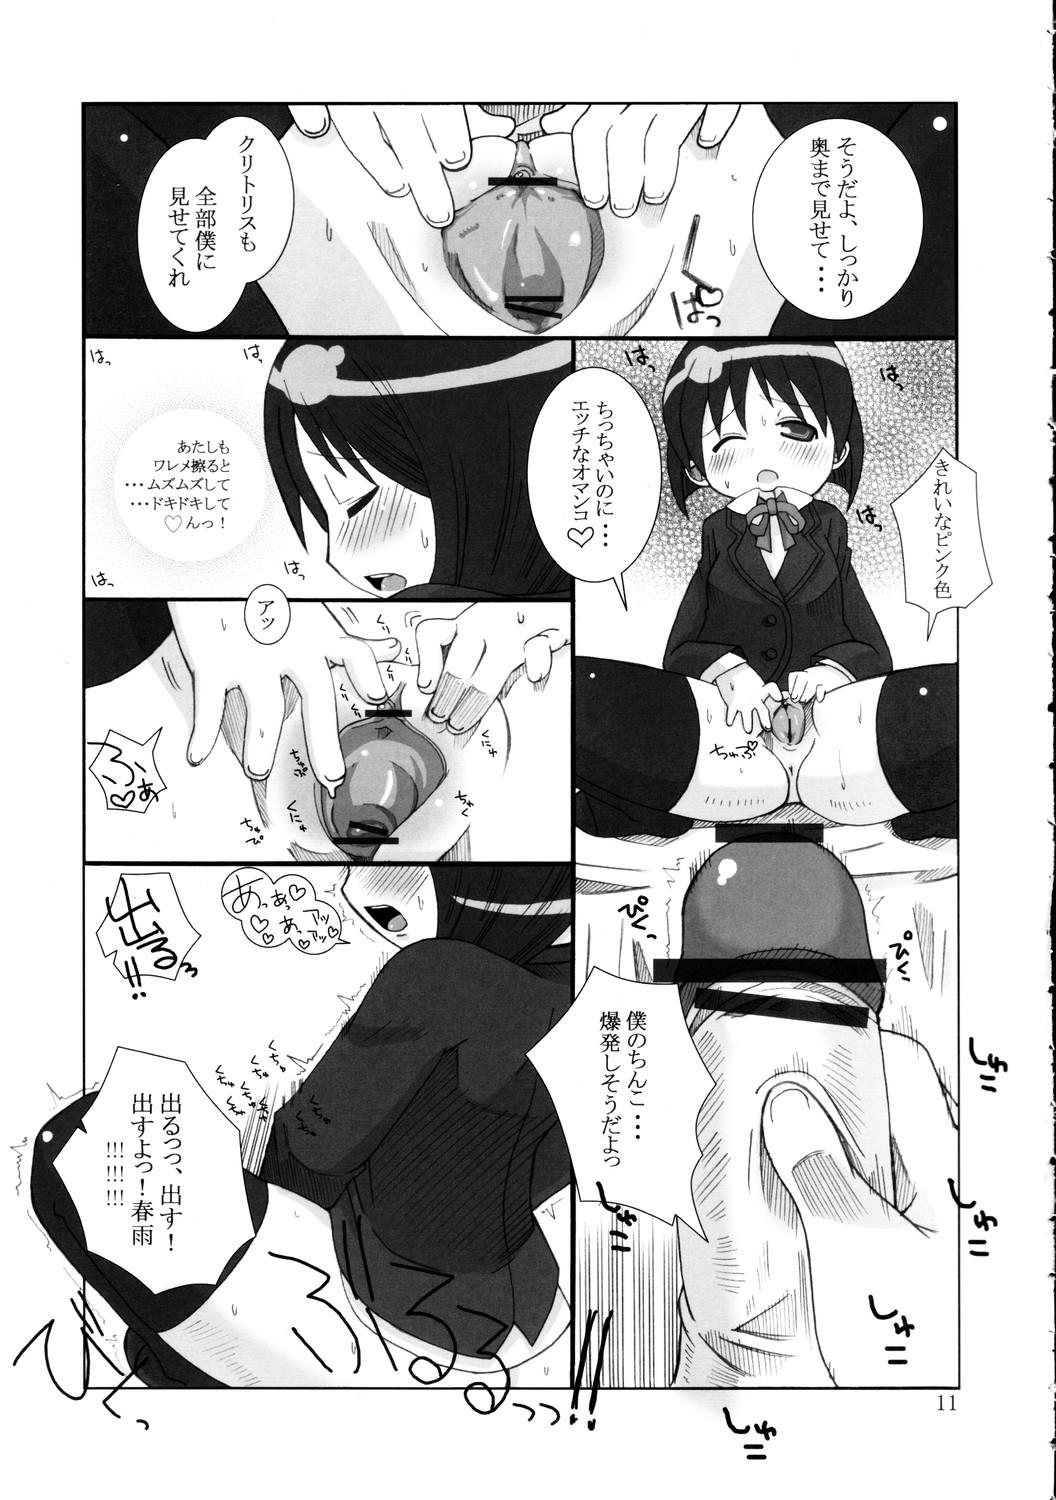 Submission Sister's case study. - Shuukan watashi no onii-chan Hot Brunette - Page 10